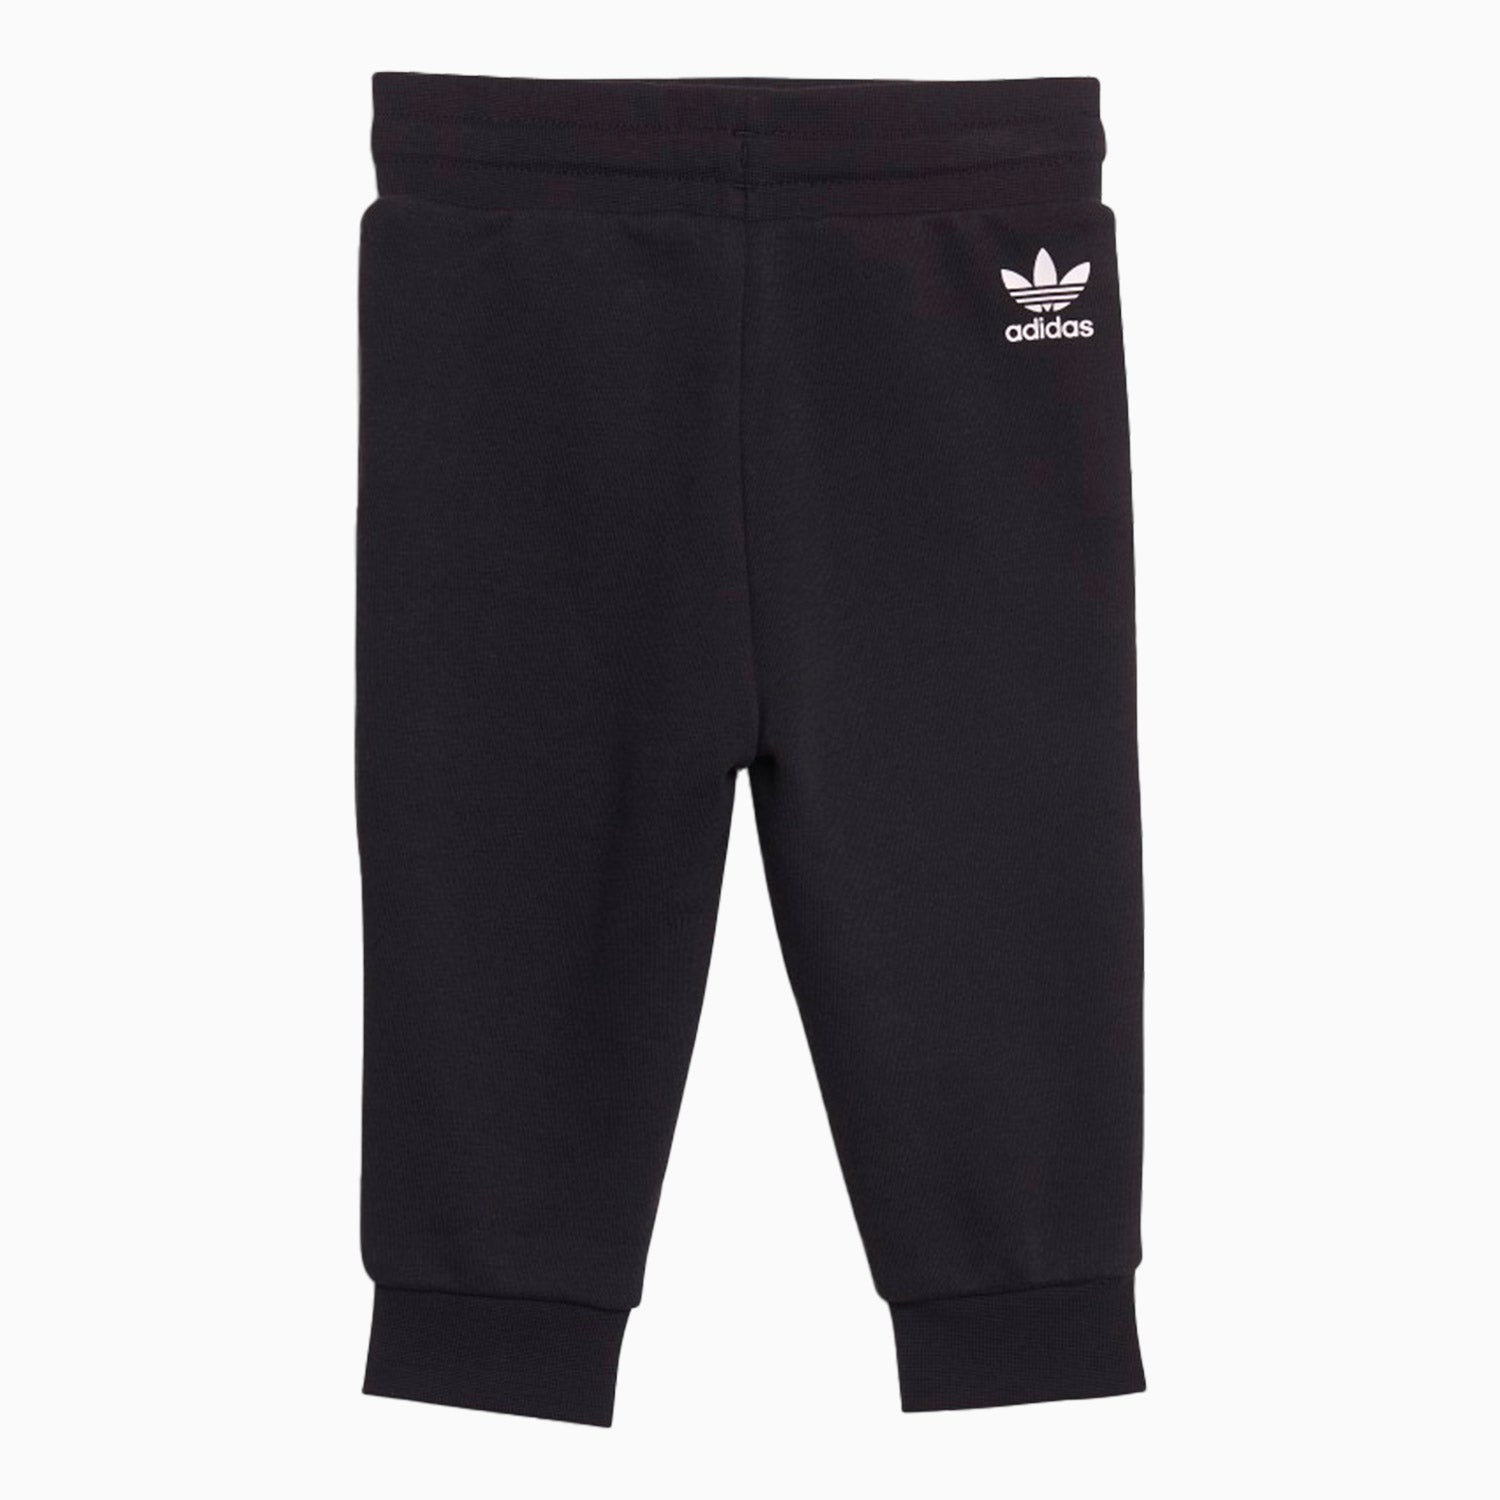 adidas-kids-adicolor-outfit-hb9521